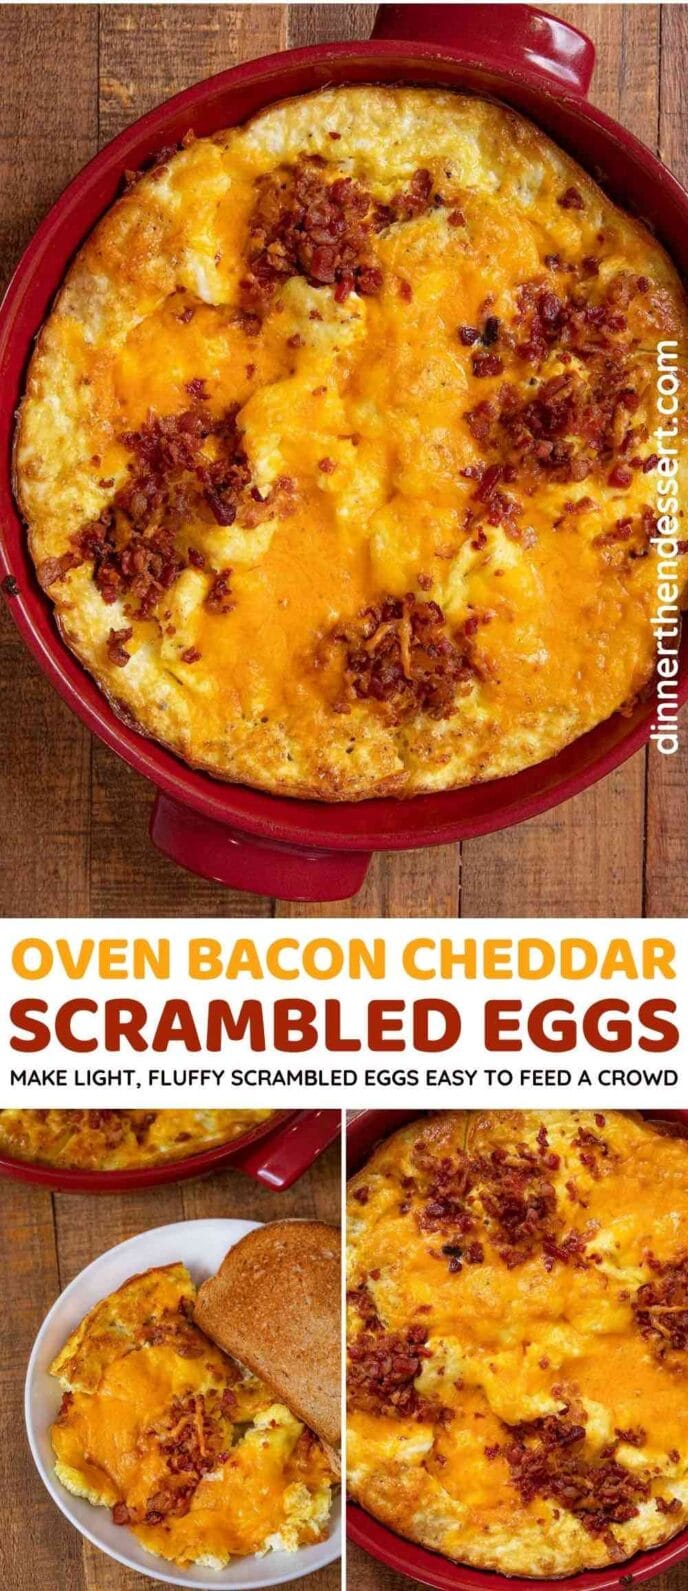 Oven Bacon Cheddar Scrambled Eggs collage